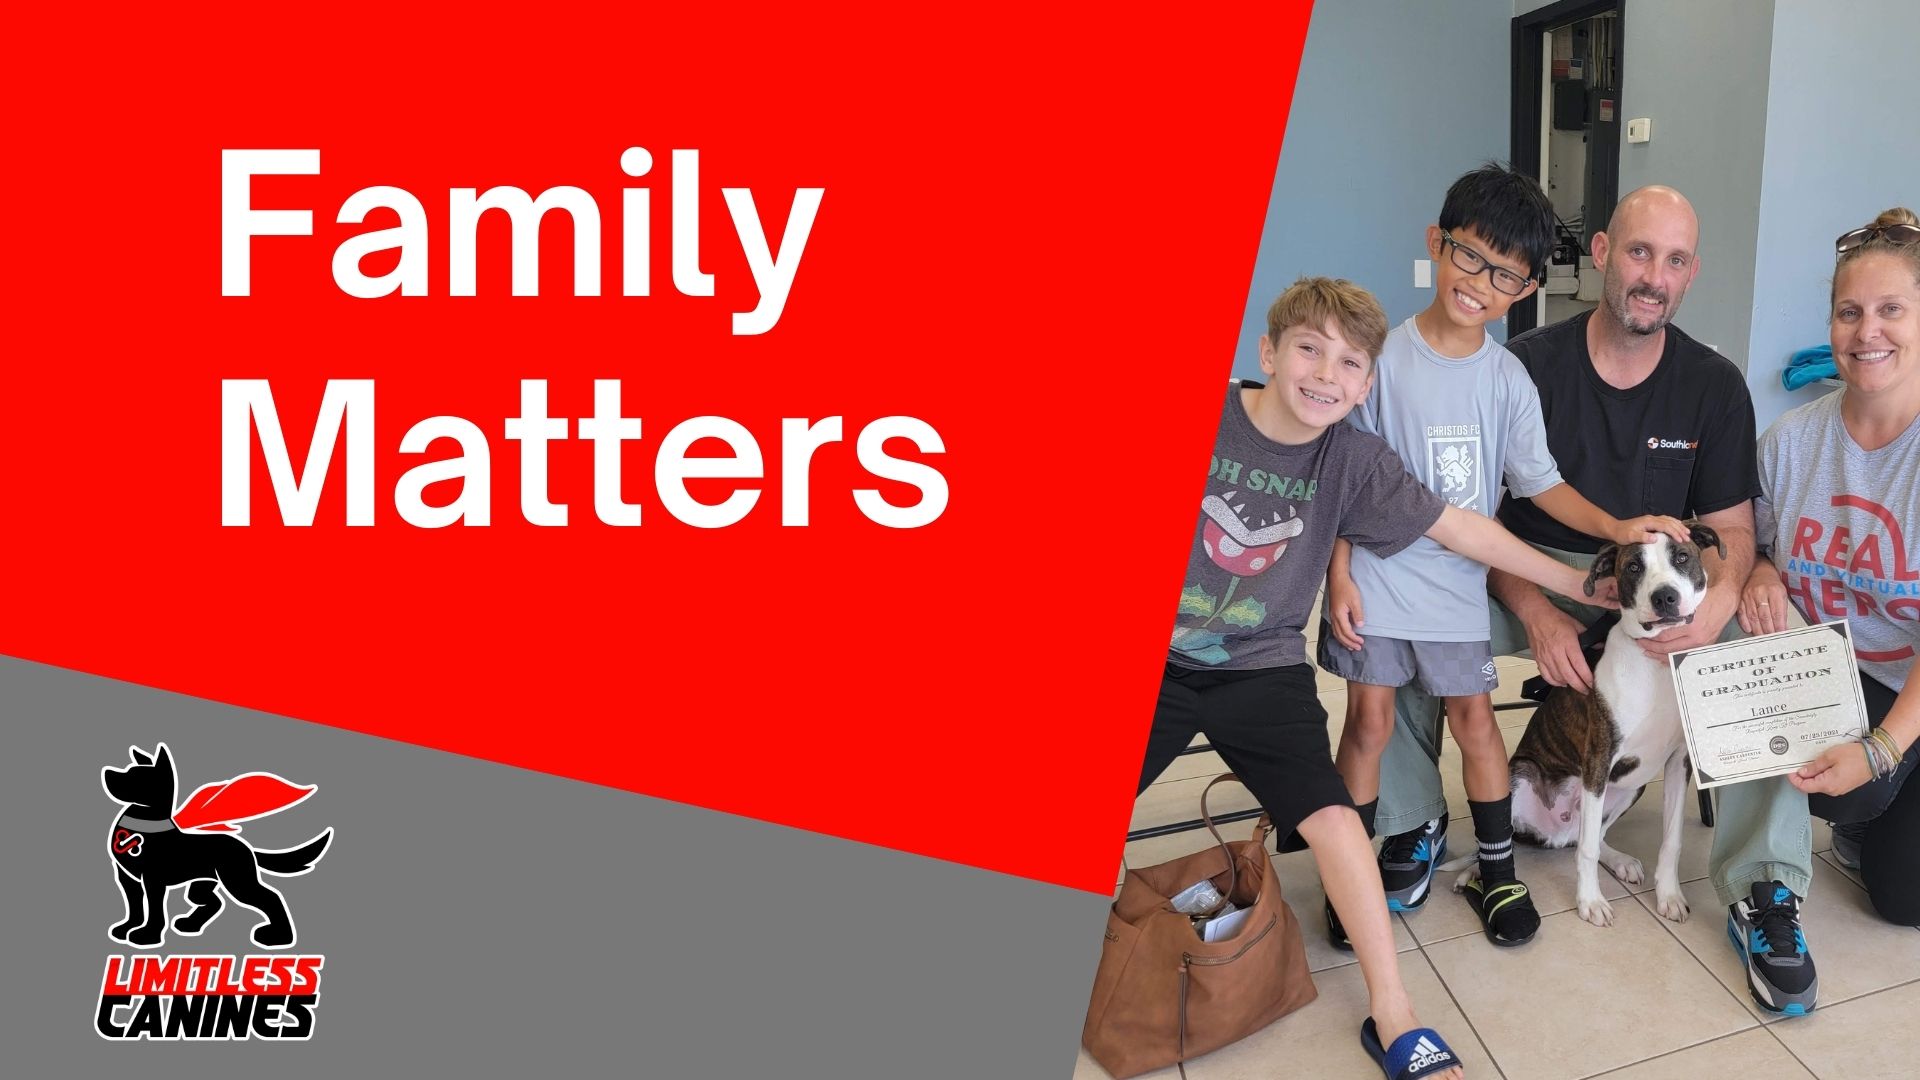 Family matters limitless canines